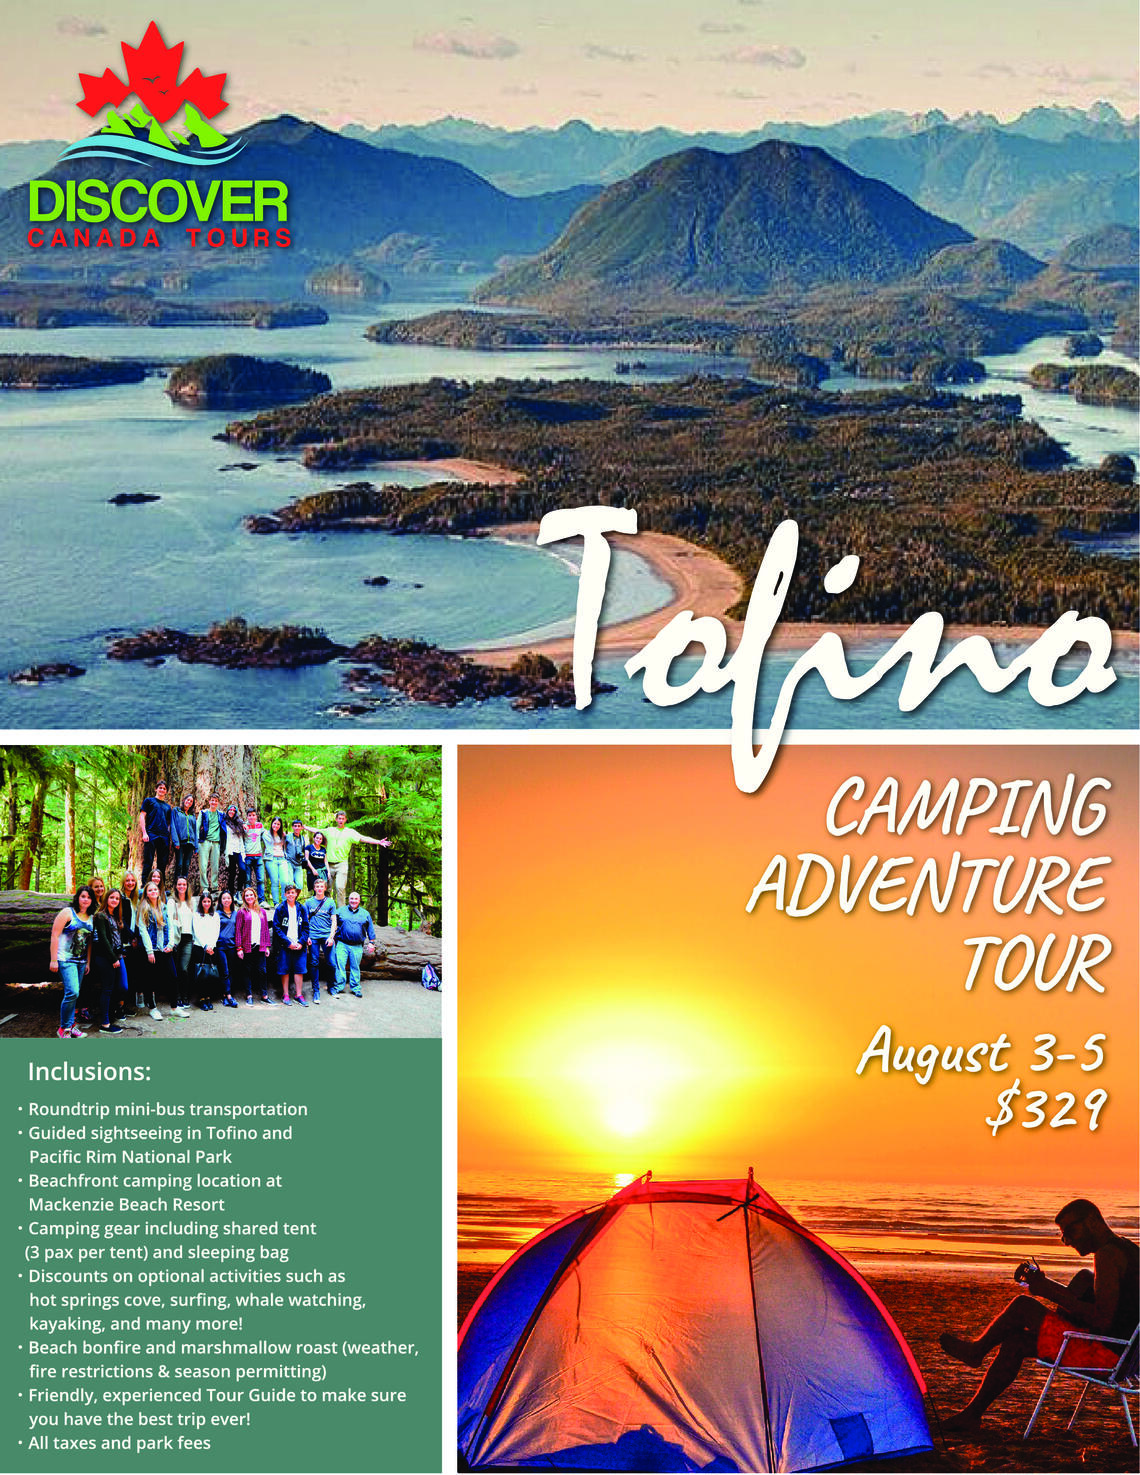 Discover Canada Tours - Tofino Ultimate Camping Tour